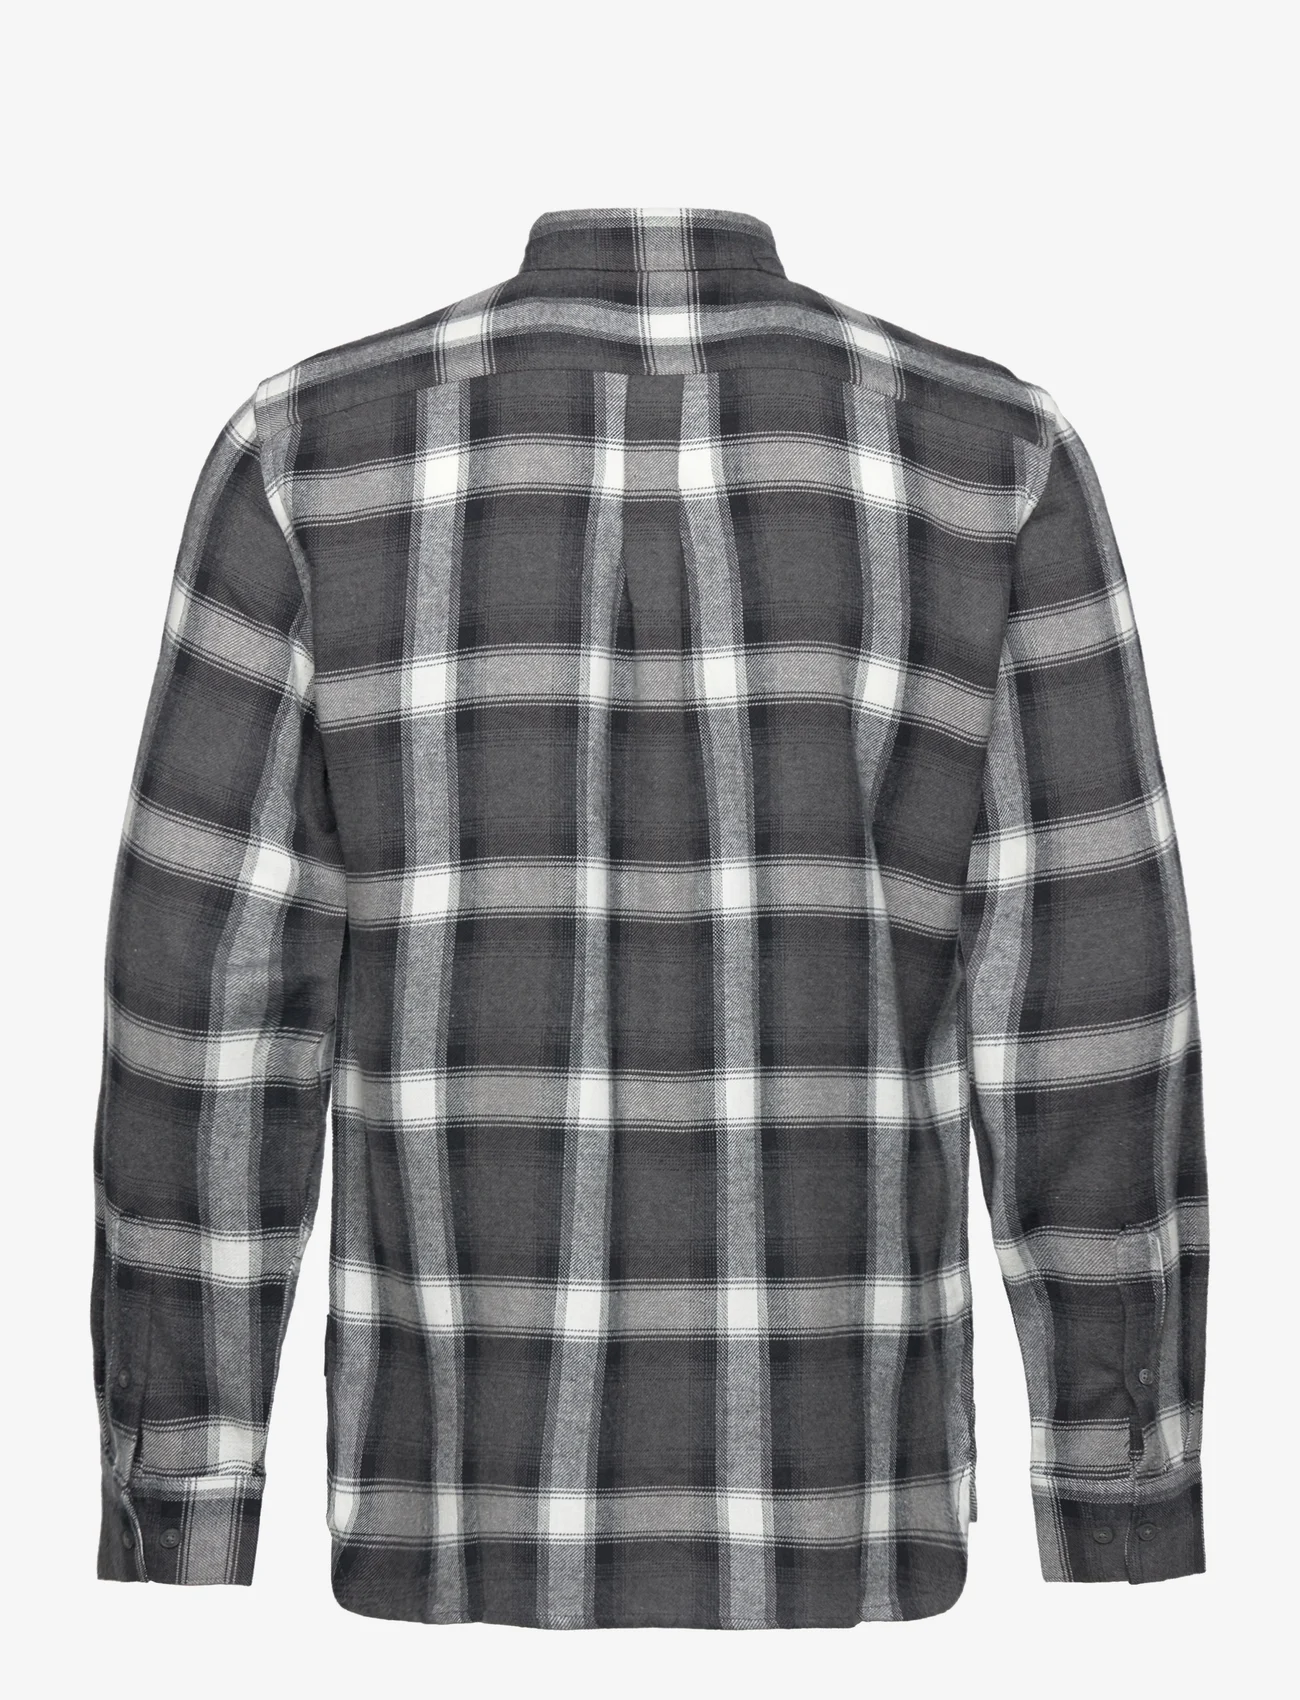 French Connection - CHECKED FLANNEL - languoti marškiniai - black - 1